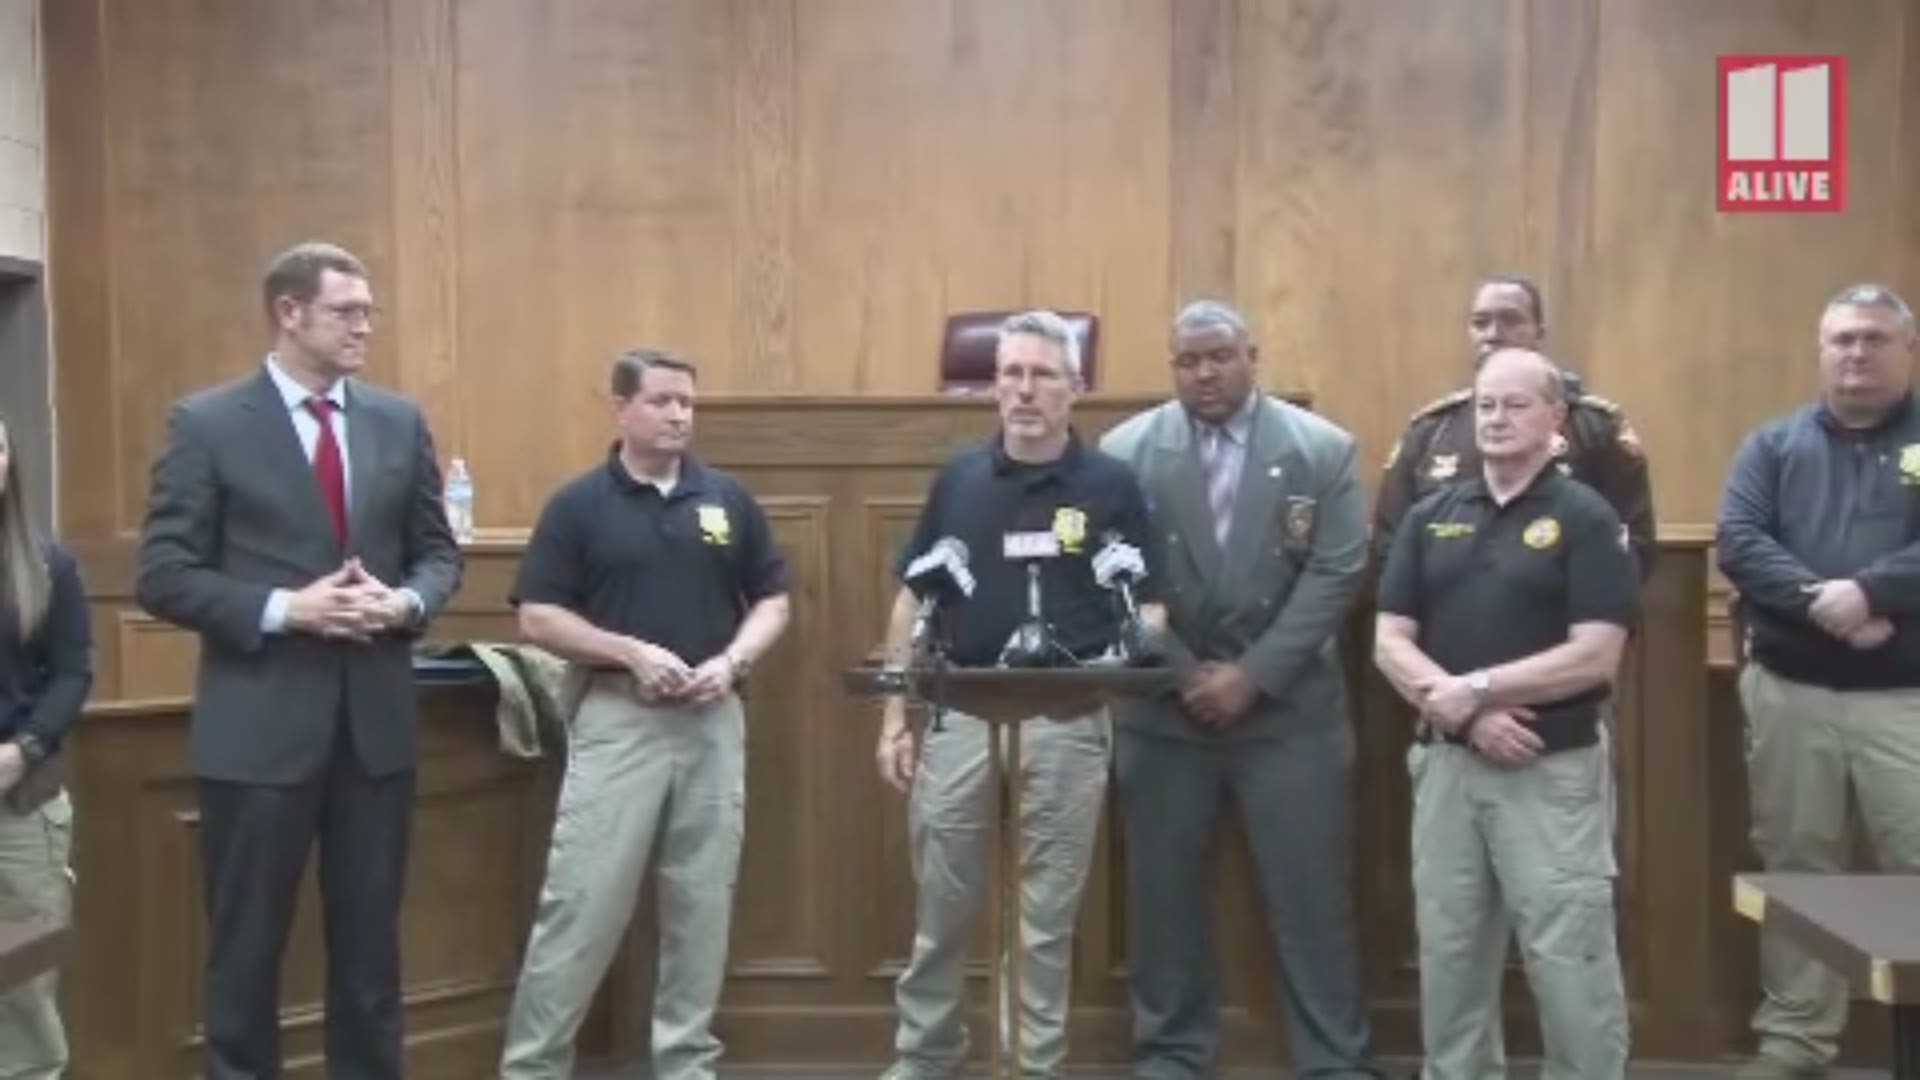 At a Wednesday afternoon press conference, GBI Assistant Special Agent Todd Crosby announced the arrest of 22-year-old Jaivon Abron.